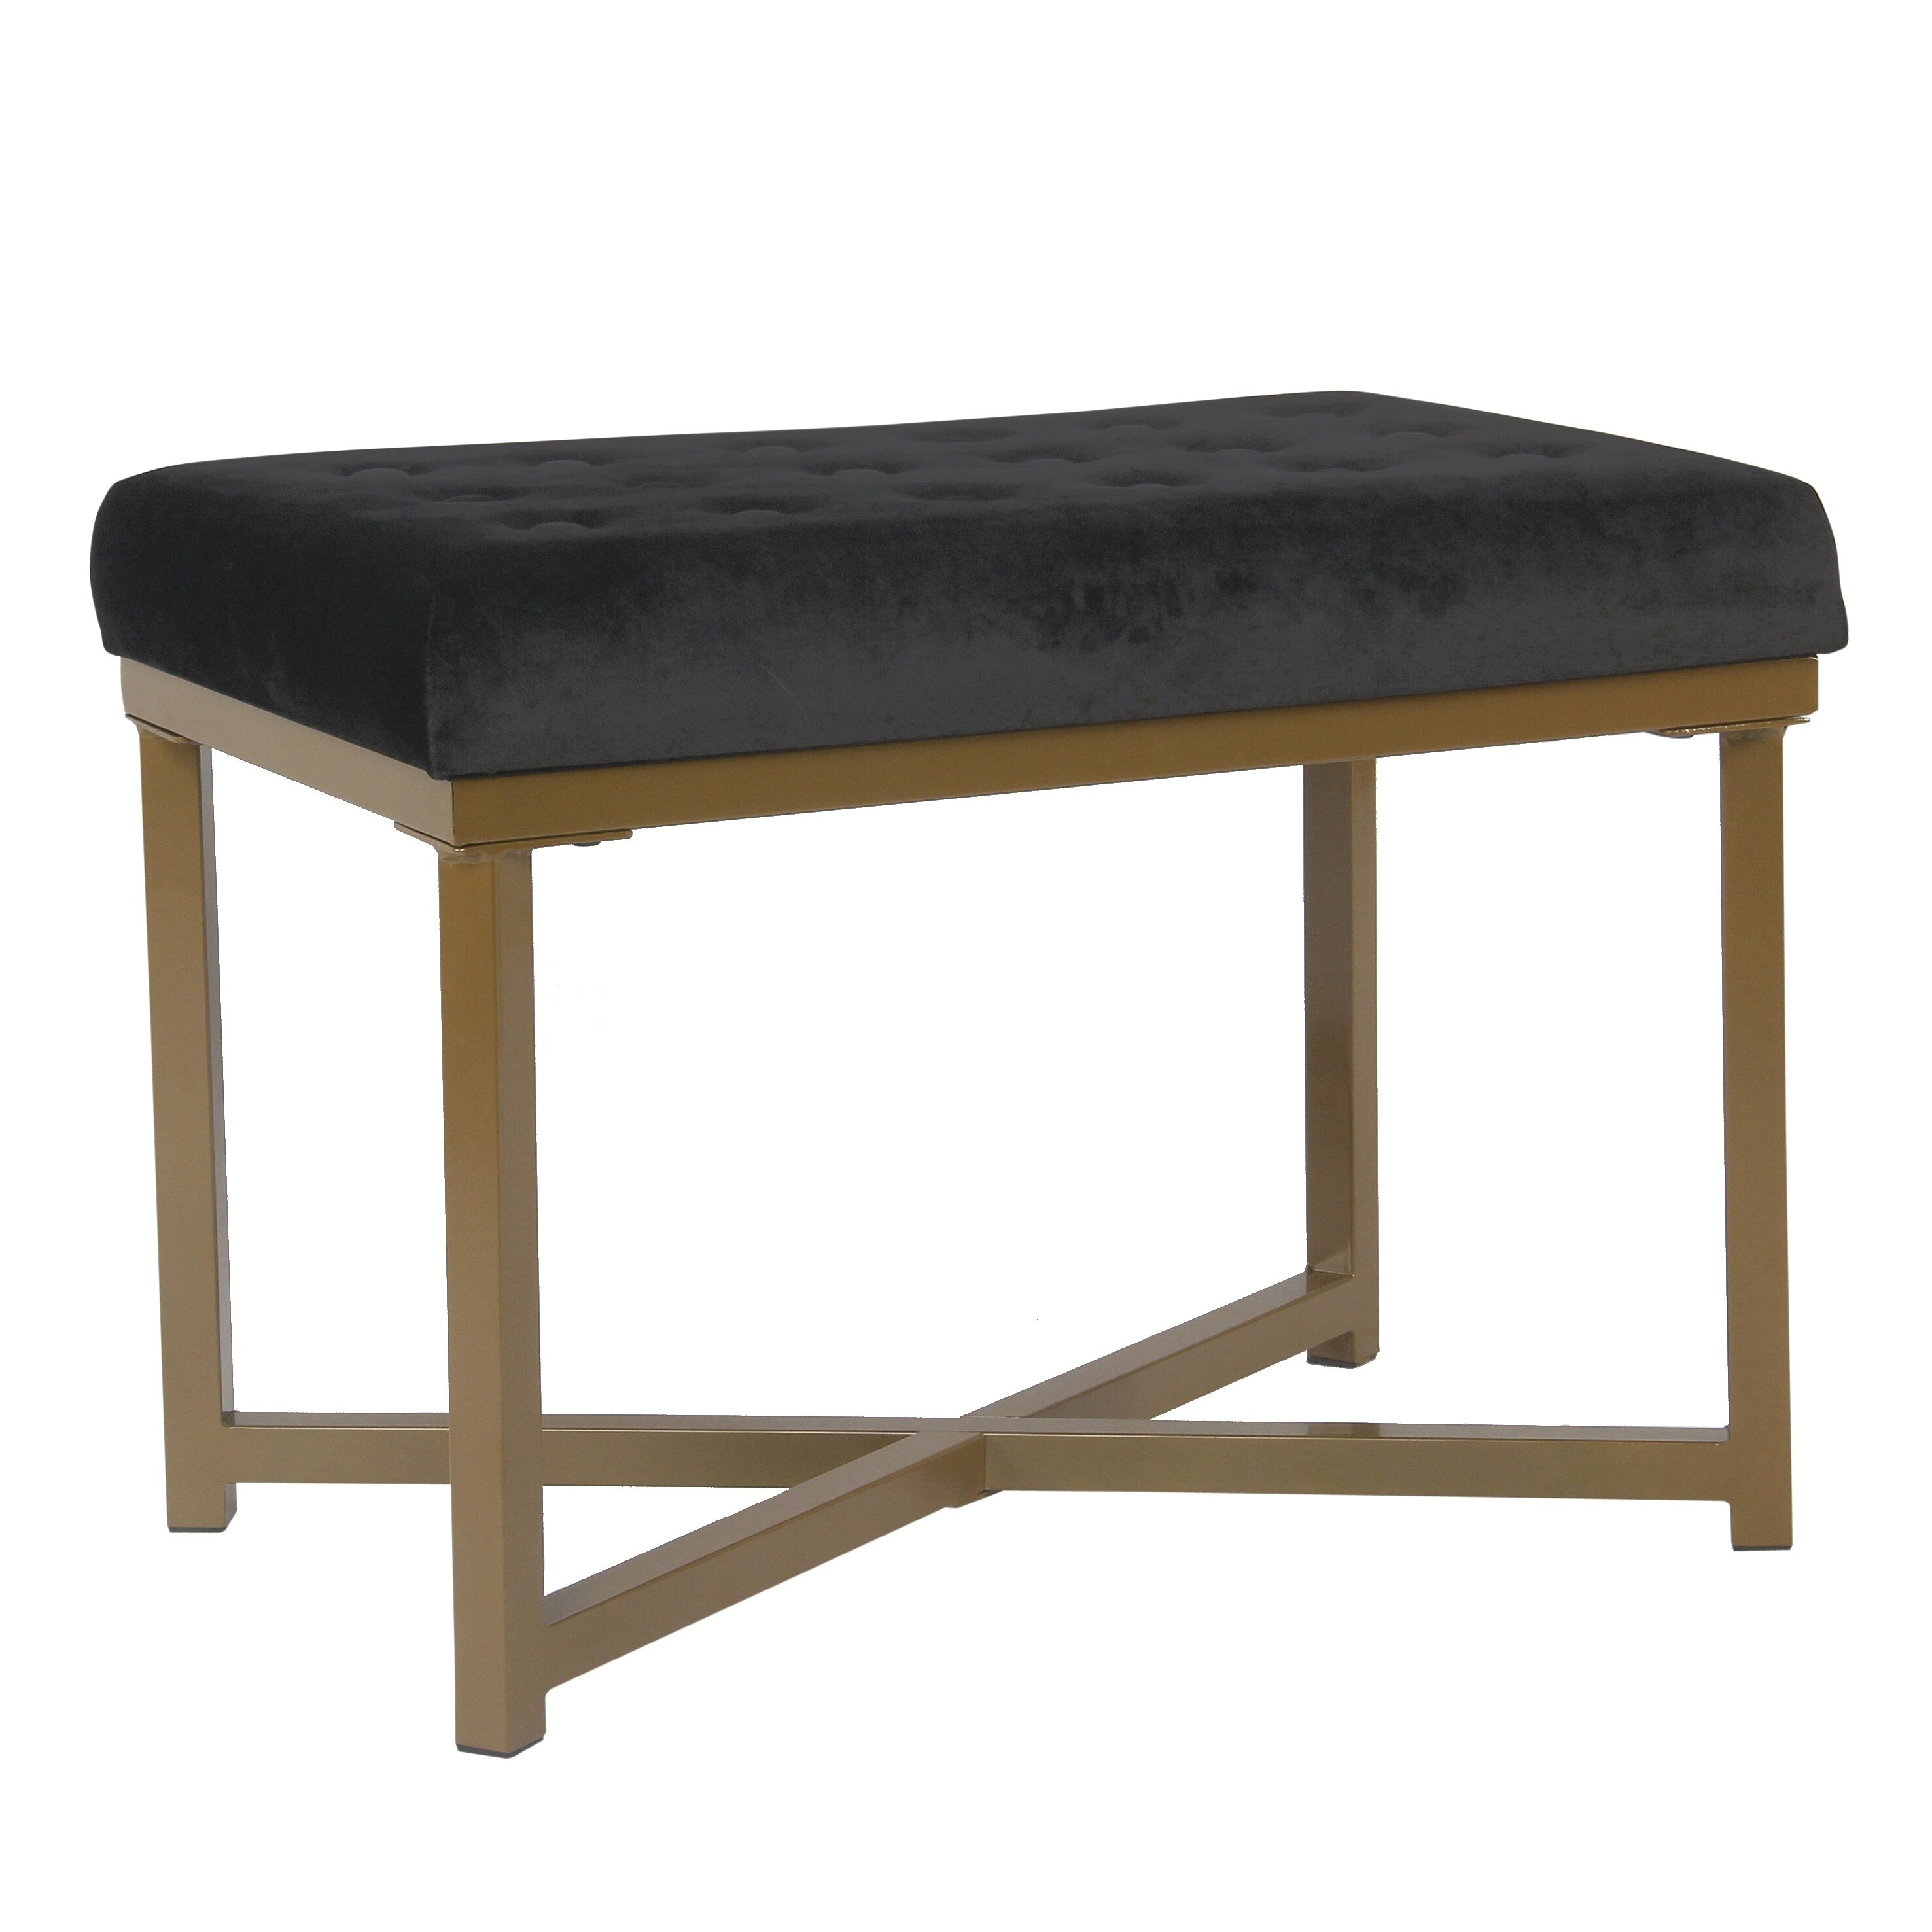 Benjara Metal Framed Ottoman with Button Tufted Velvet Upholstered Seat, Black and Gold